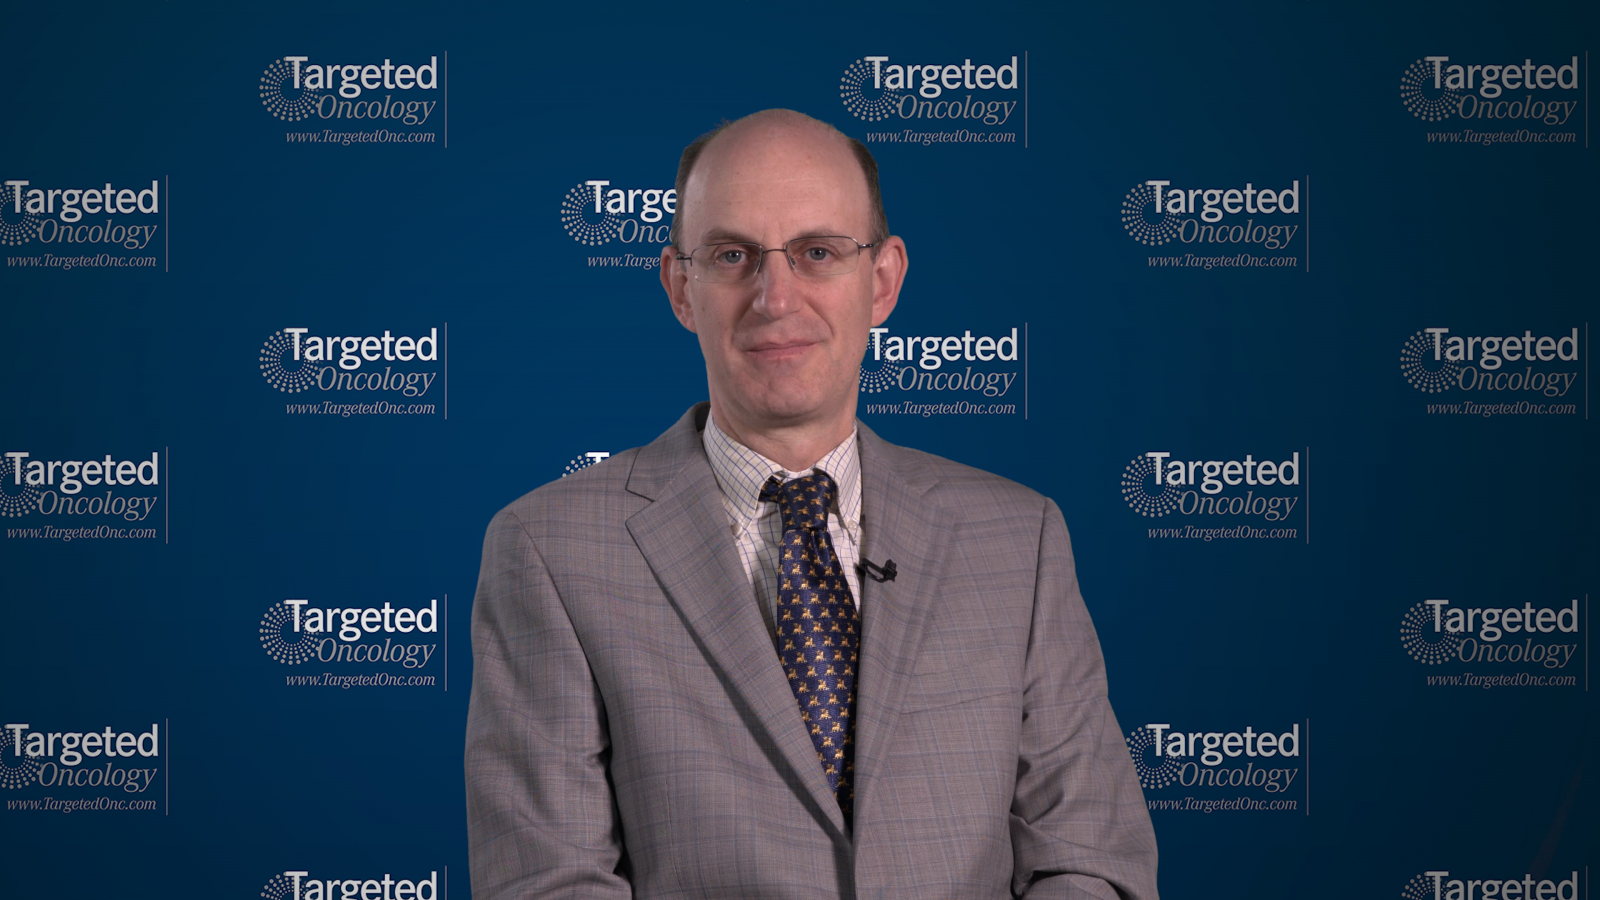 A 59-Year-Old Man With Relapsed Follicular Lymphoma